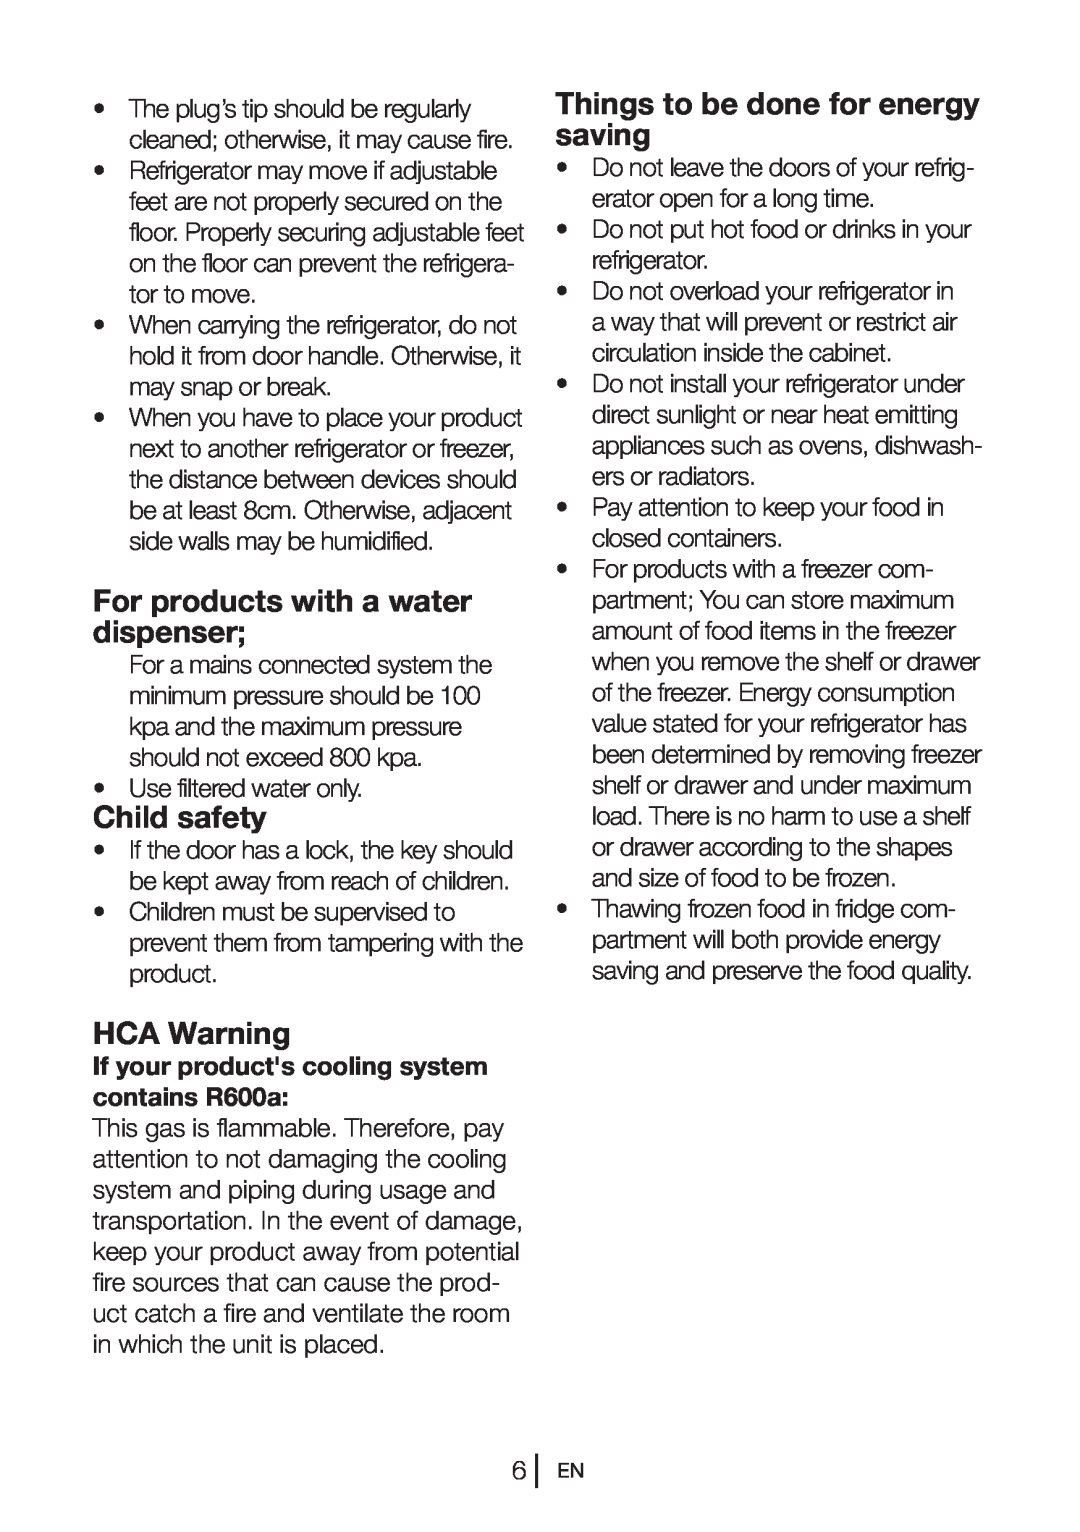 Beko SS 137020 manual For products with a water dispenser, Child safety, HCA Warning, Things to be done for energy saving 